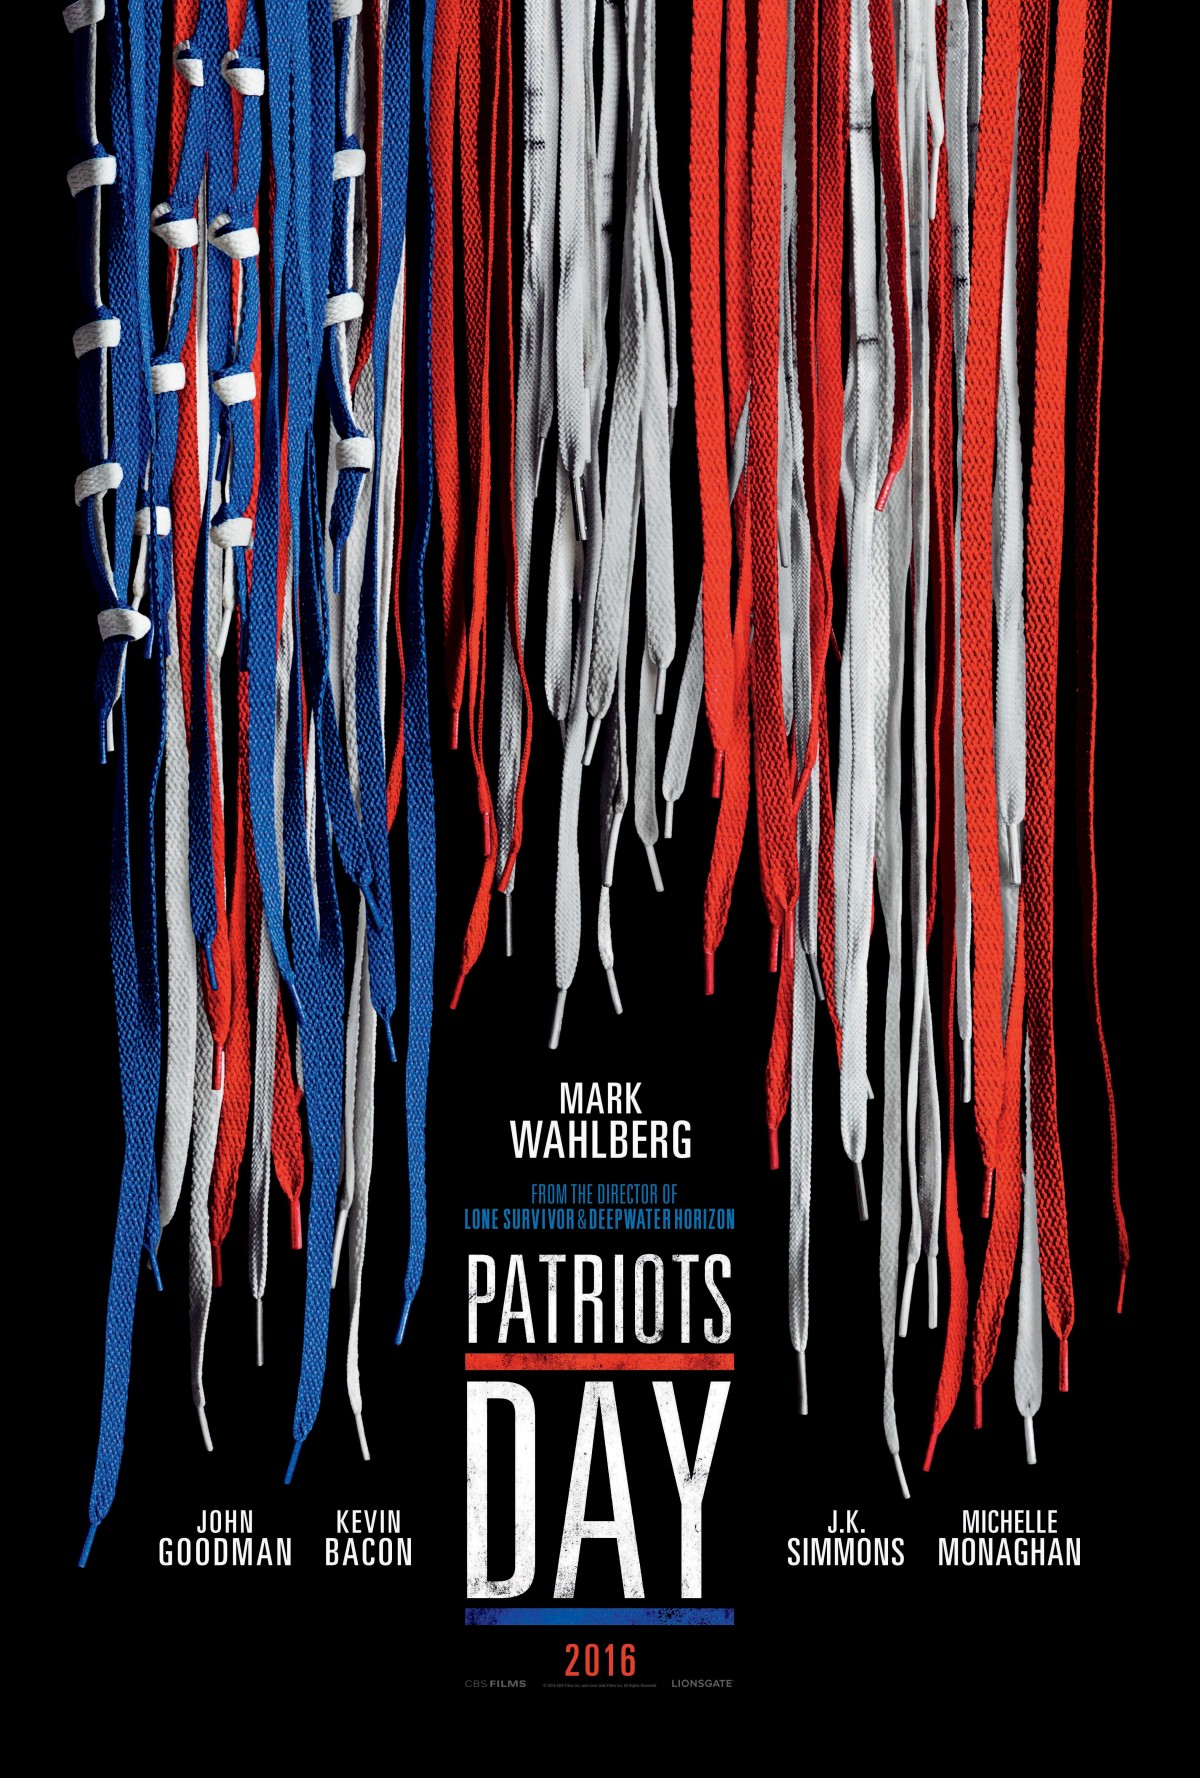 Check Out the Teaser Poster for ‘Patriots Day’ mxdwn Movies